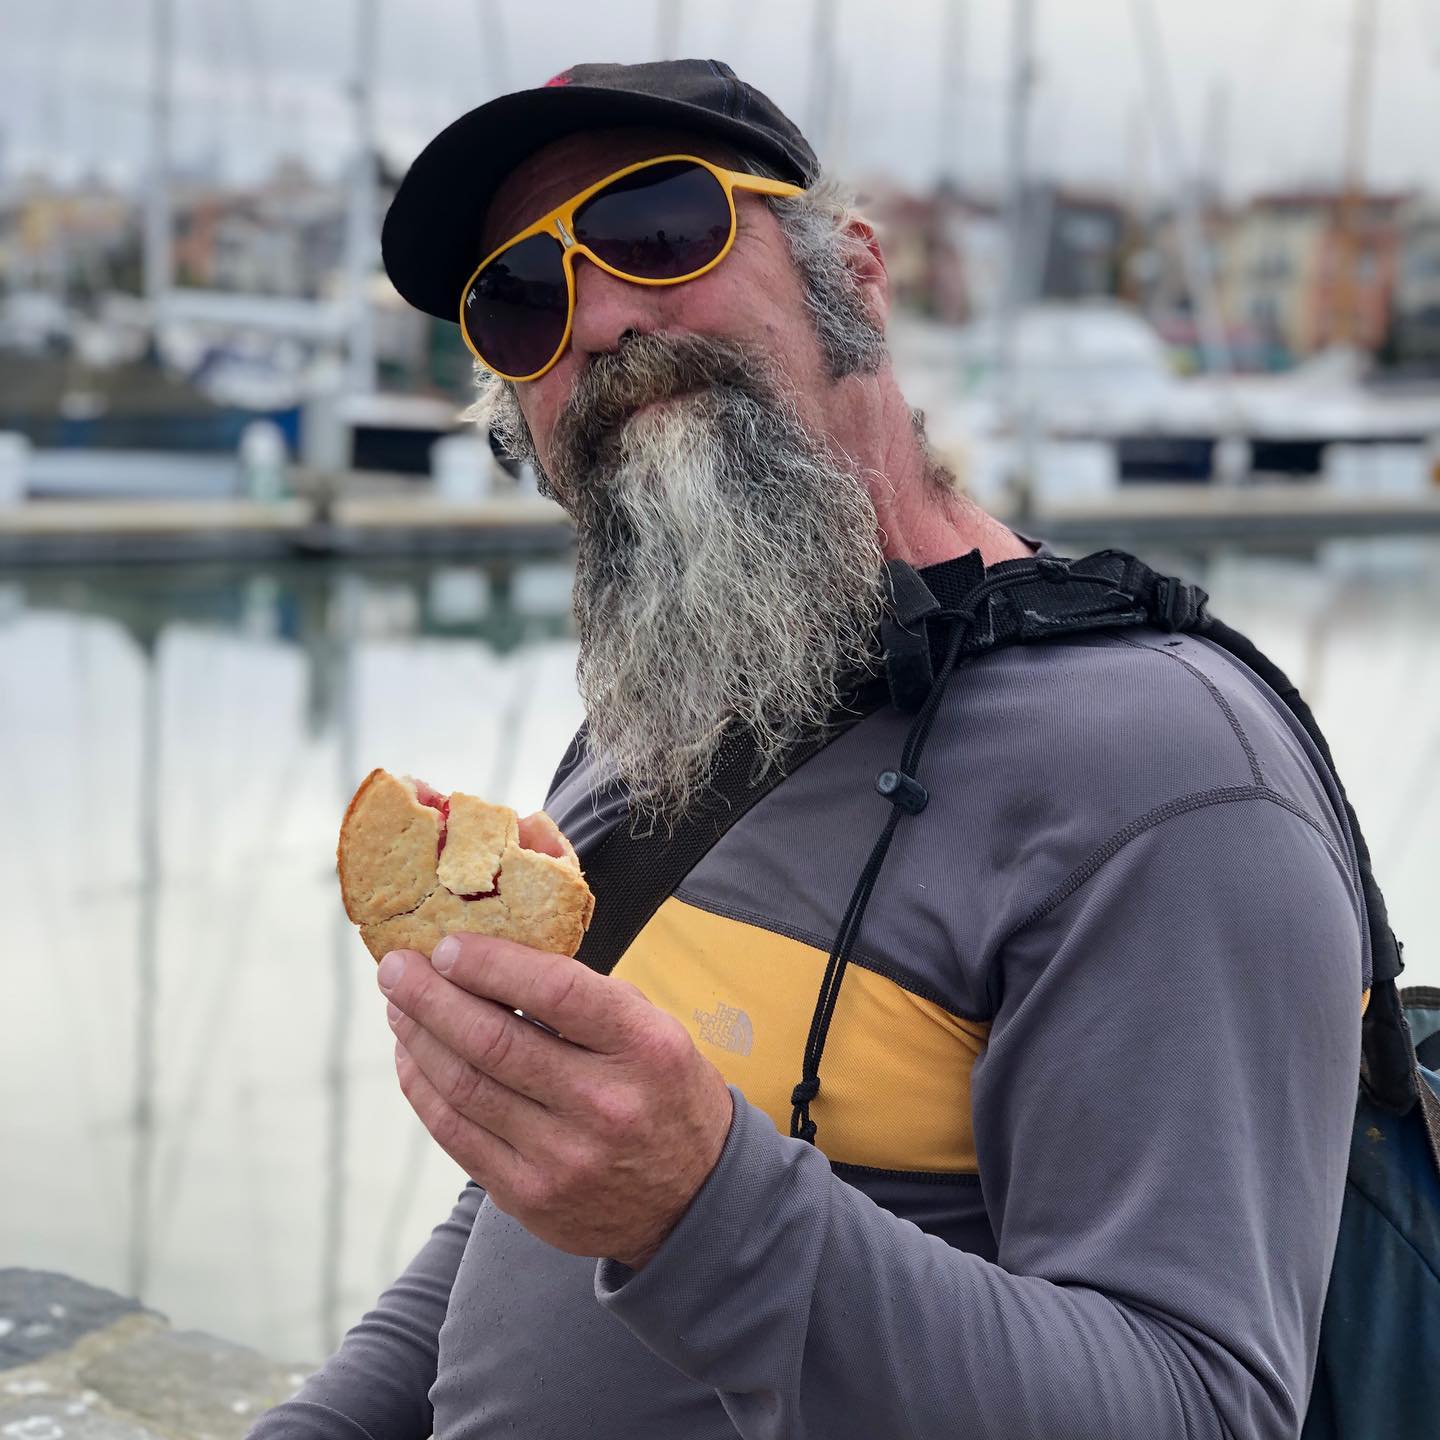 2021 Rolex Big Boat series day 3 on Stewball. Slamon got a cherry pie, great start to the day :)